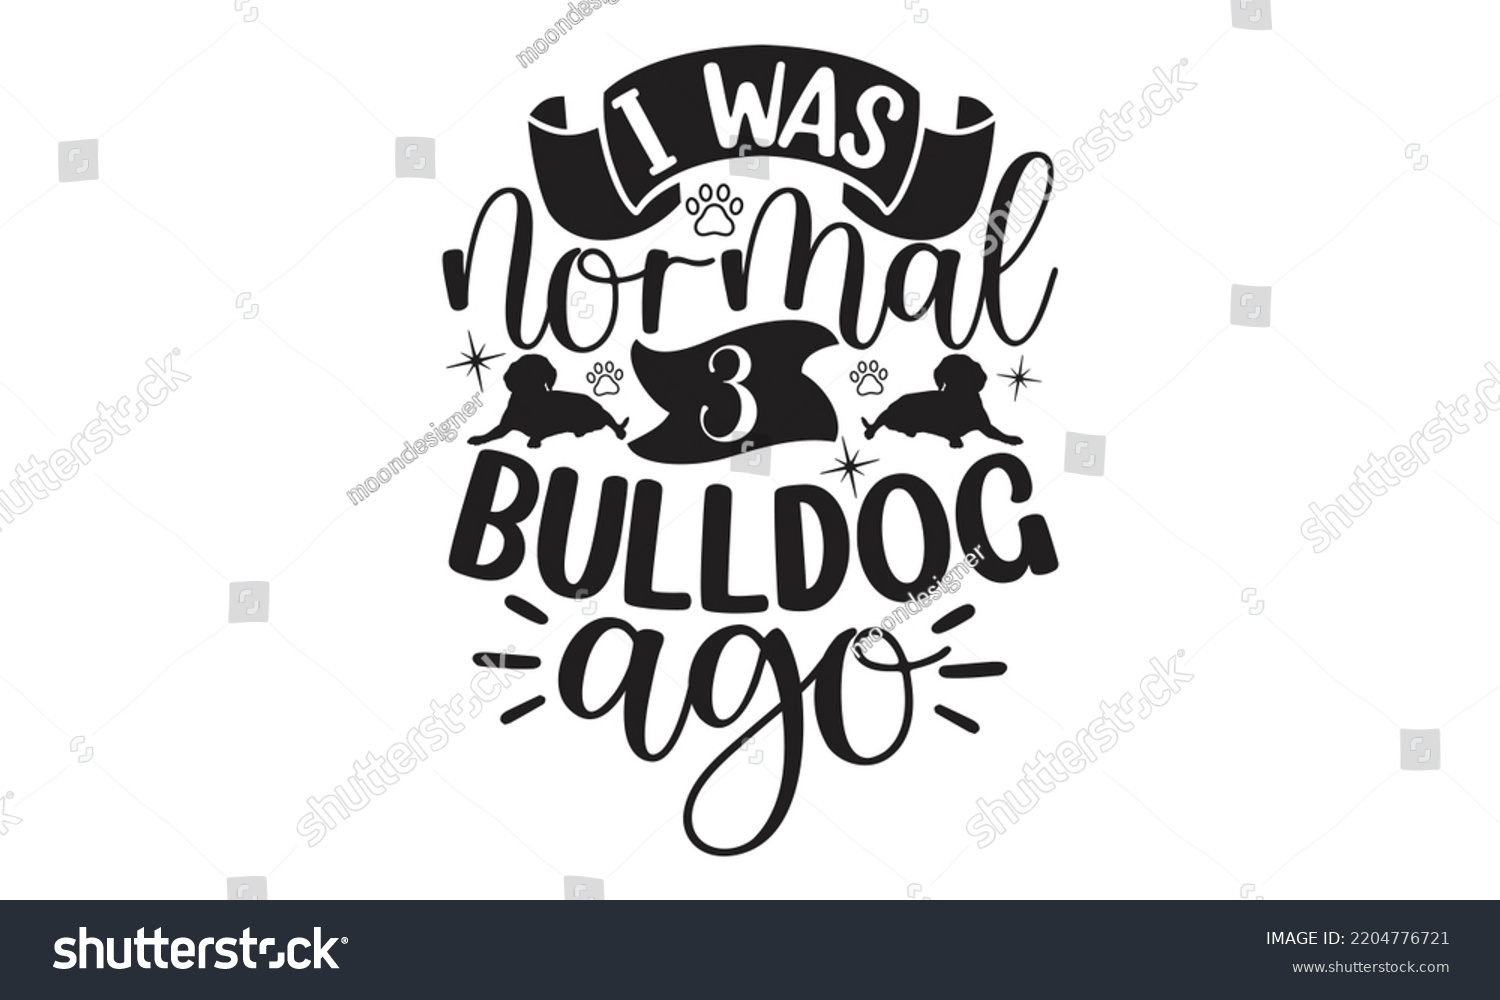 SVG of I was normal 3 bulldog ago - Bullodog T-shirt and SVG Design,  Dog lover t shirt design gift for women, typography design, can you download this Design, svg Files for Cutting and Silhouette EPS, 10 svg